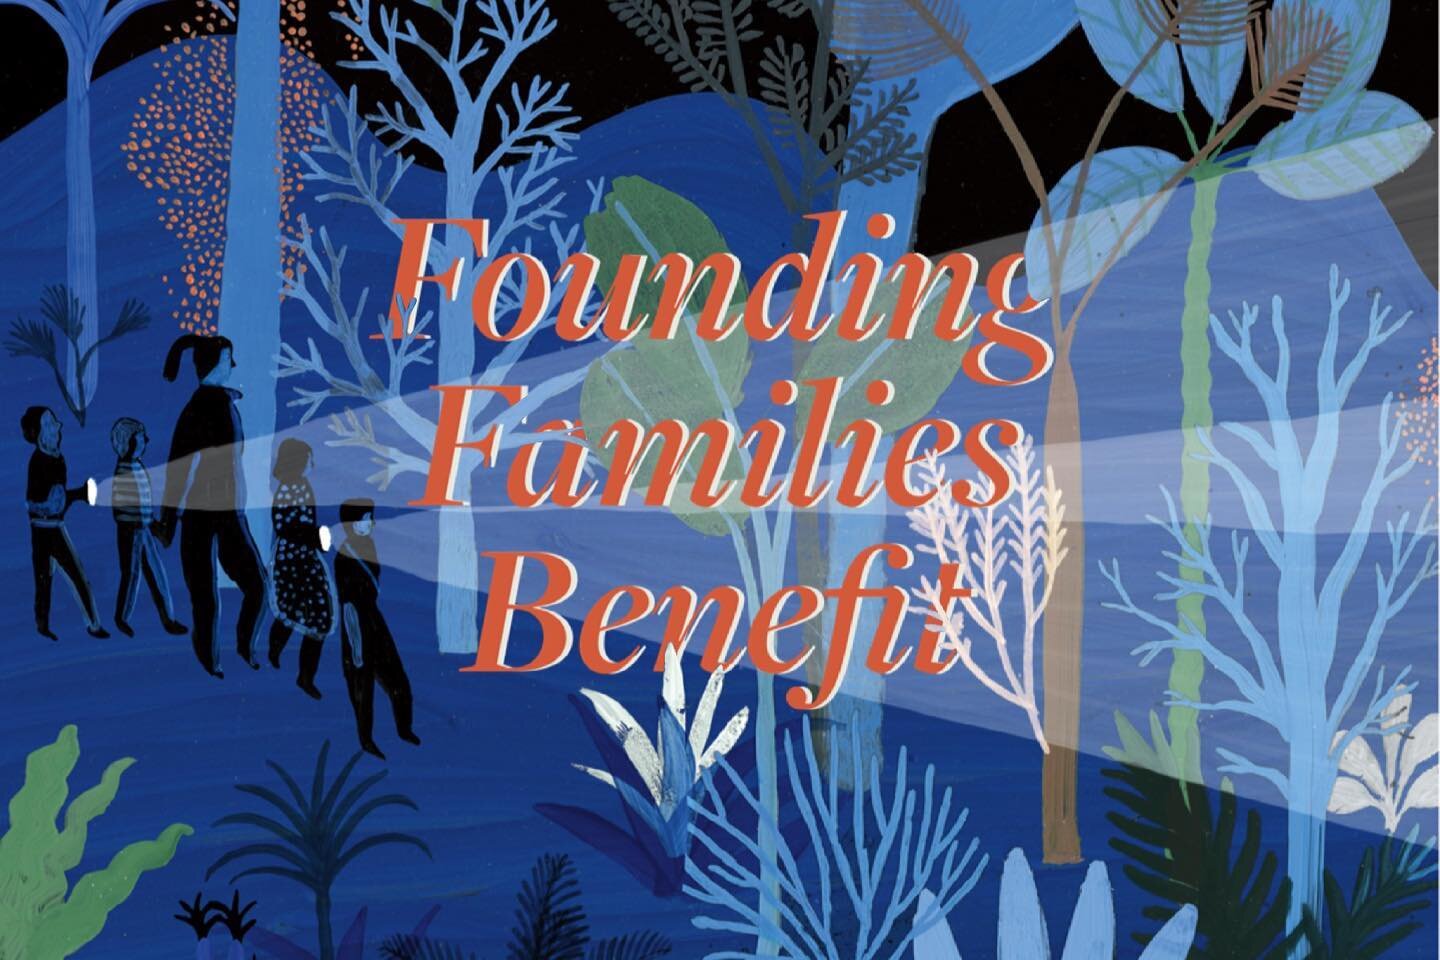 Whittle School &amp; Studios DC is pleased to announce the launch of a new benefit program for all families that enroll by September 1, 2021. This Founding Families Benefit program is a 3-year, need-blind tuition assistance program designed to ease t